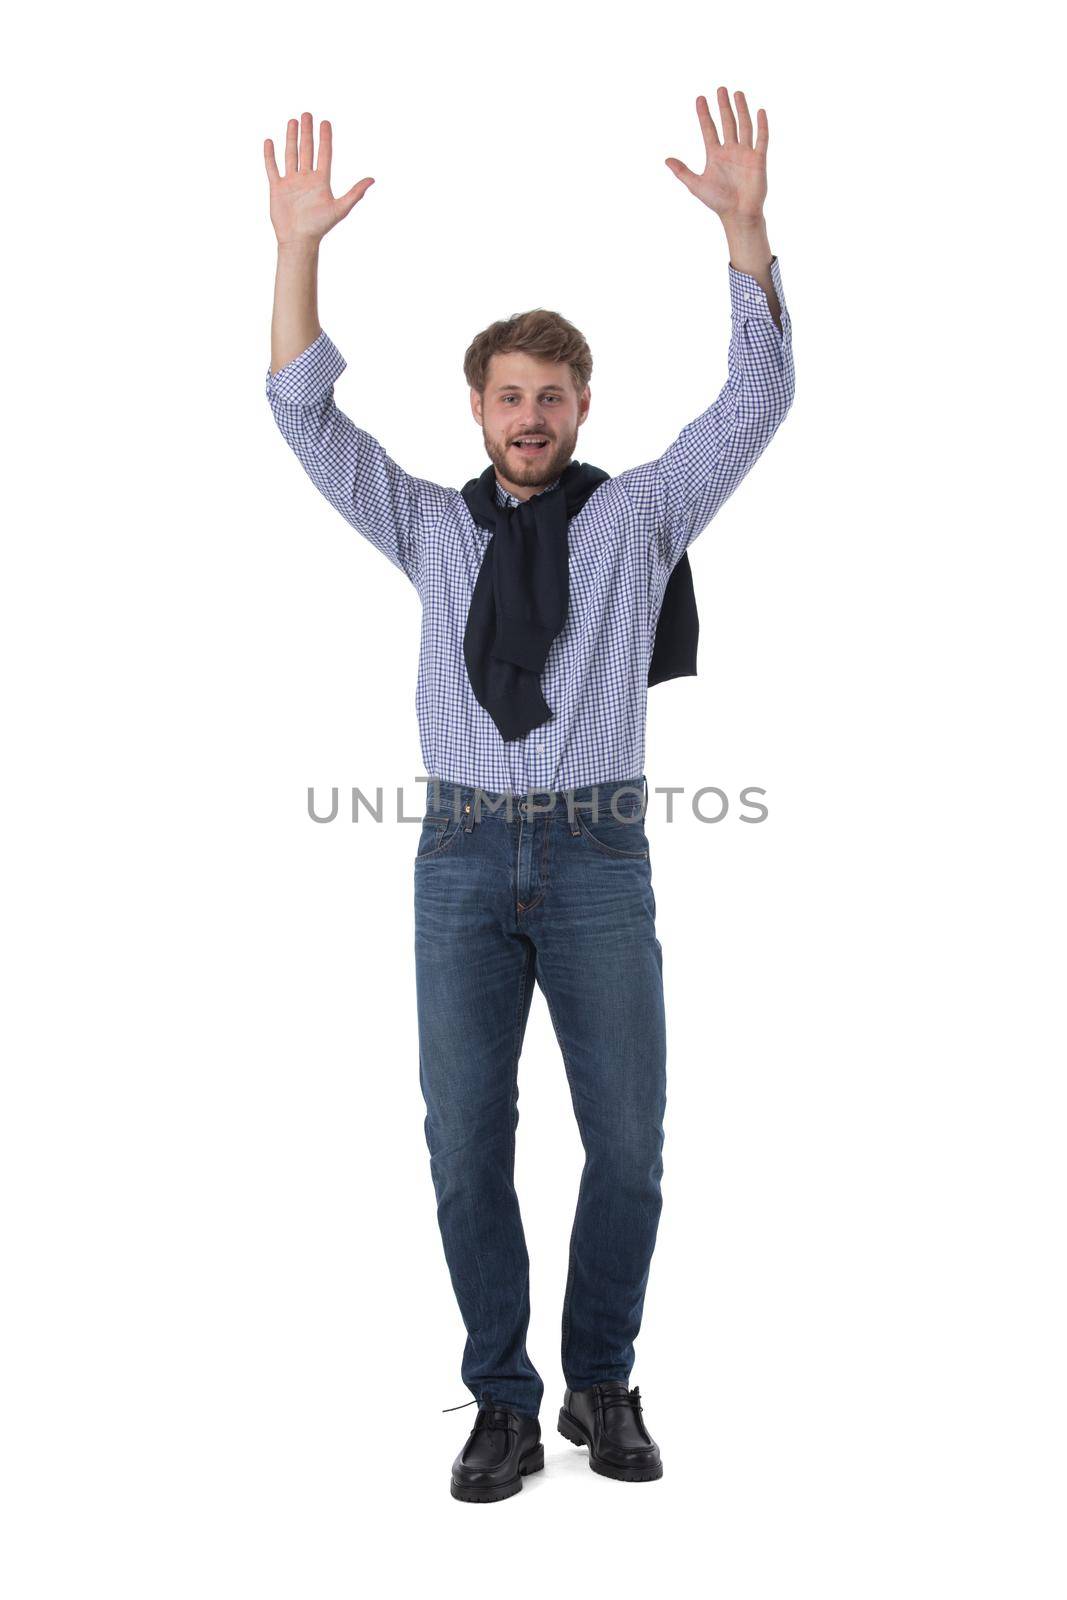 Young man with arms raised isolated on white background